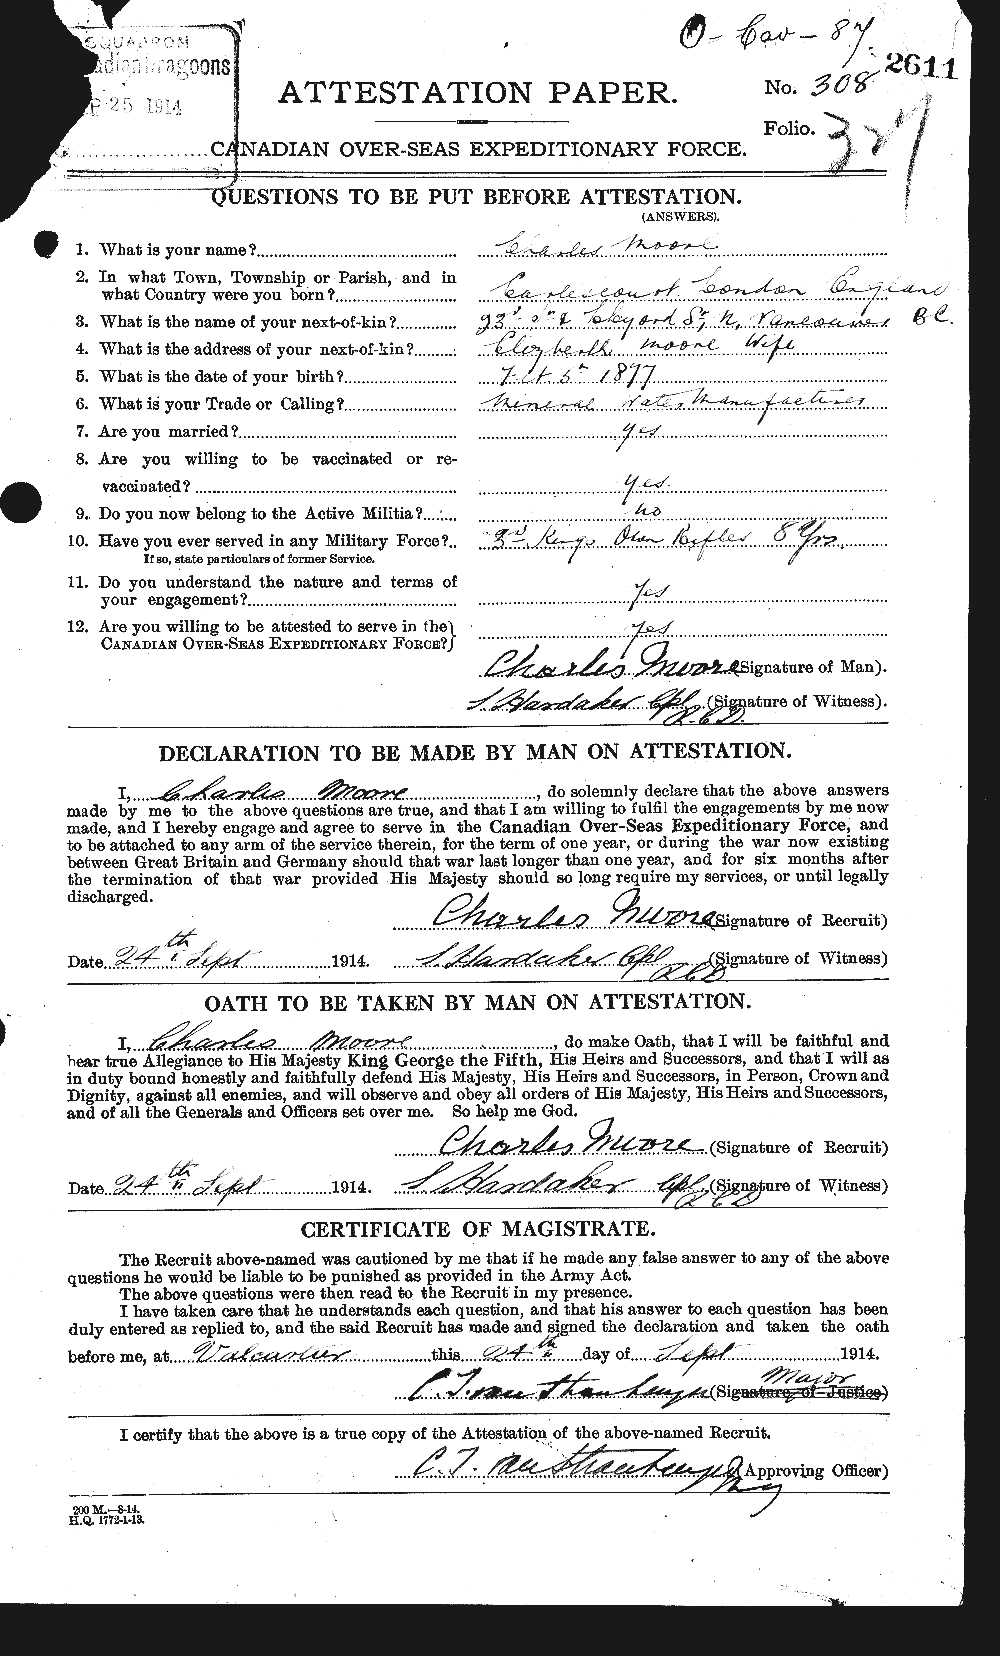 Personnel Records of the First World War - CEF 506490a